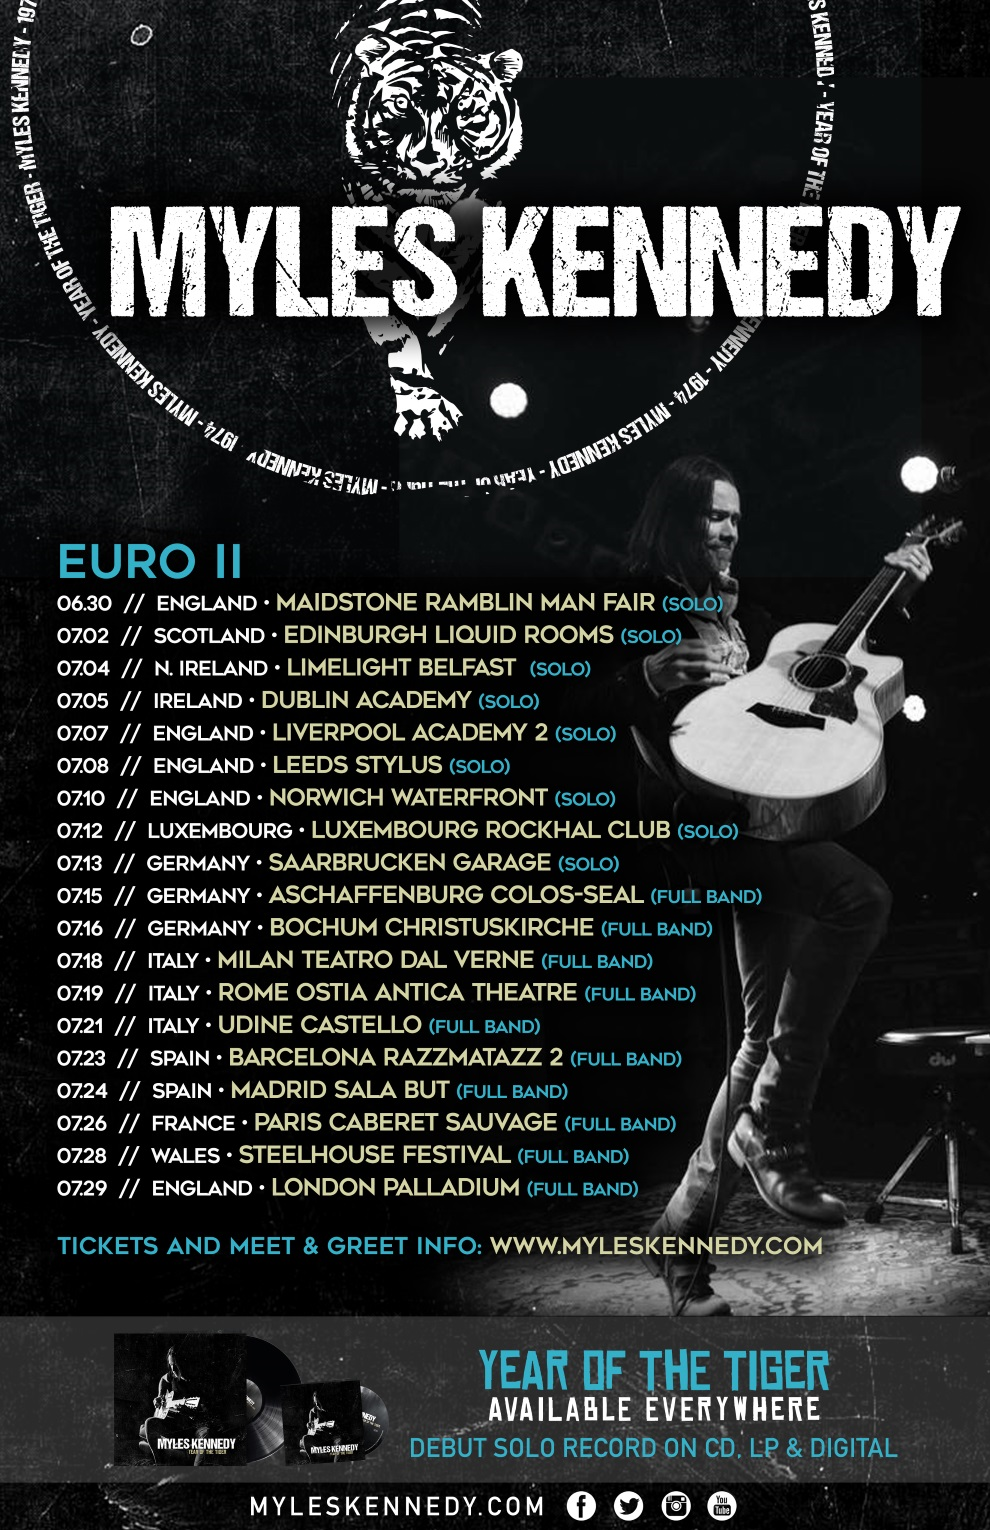 Myles Kennedy announces more UK dates